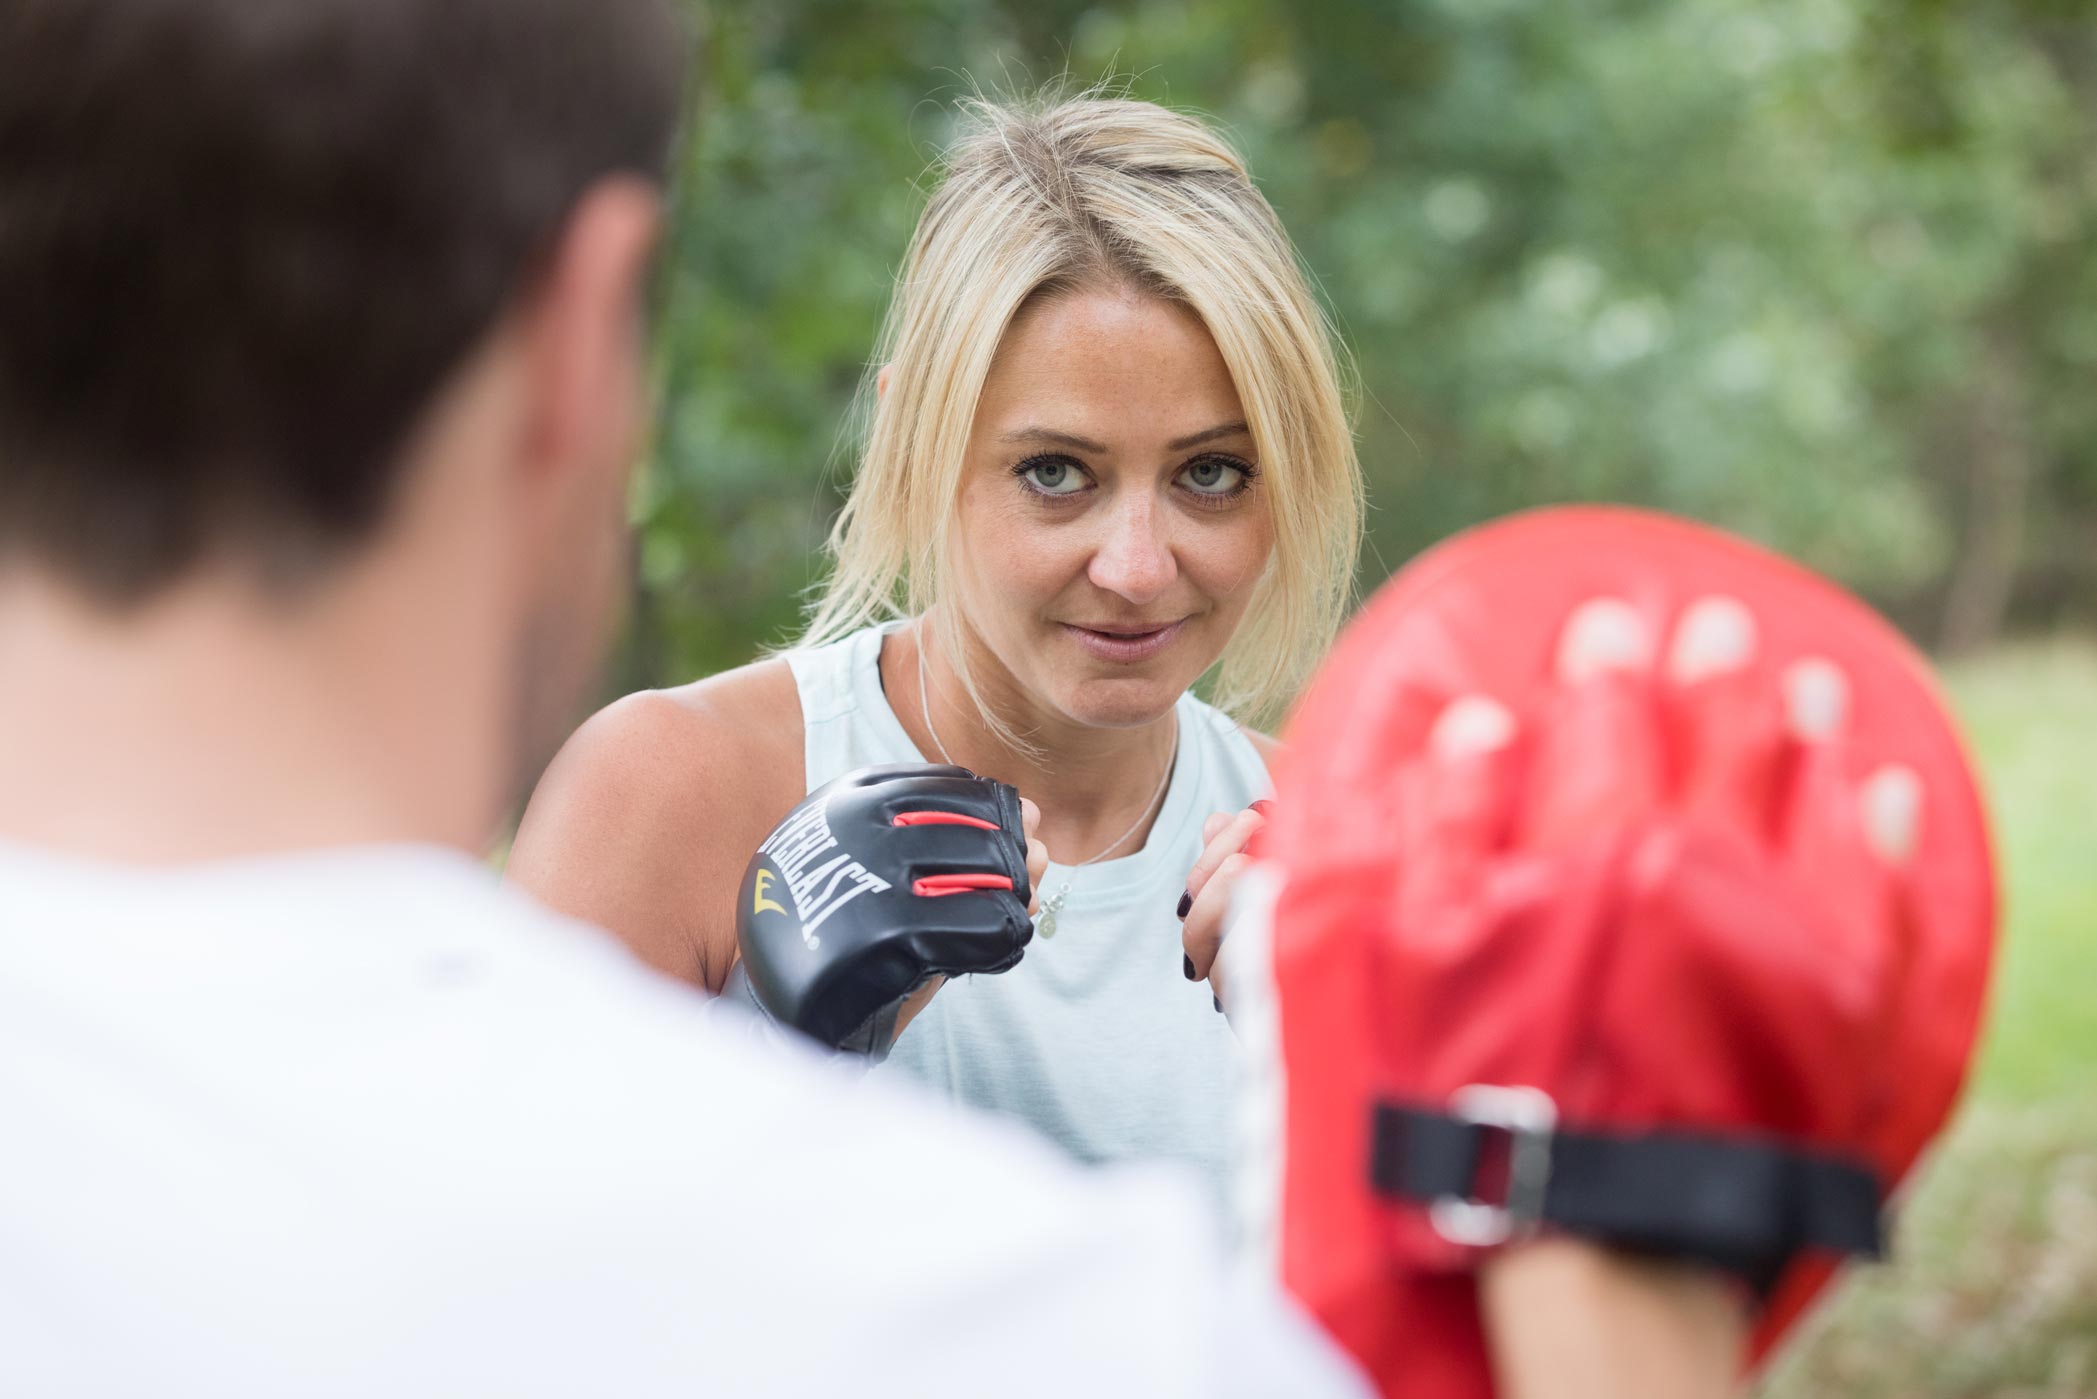 A female personal trainer boxes with a client during a fitness personal branding photography shoot in Croydon, London